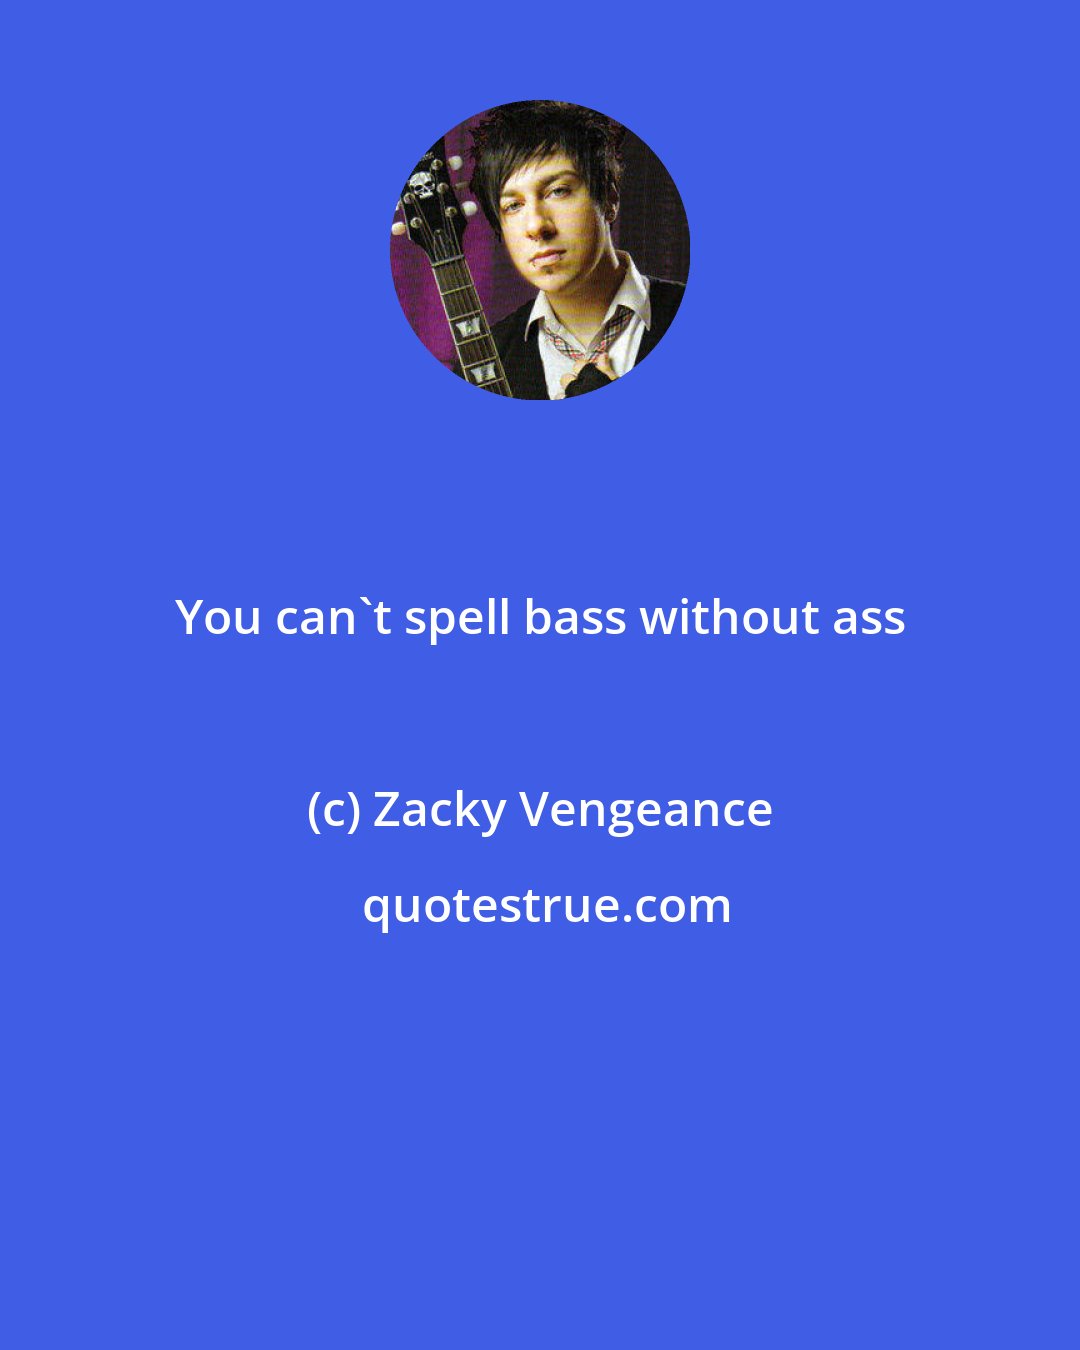 Zacky Vengeance: You can't spell bass without ass